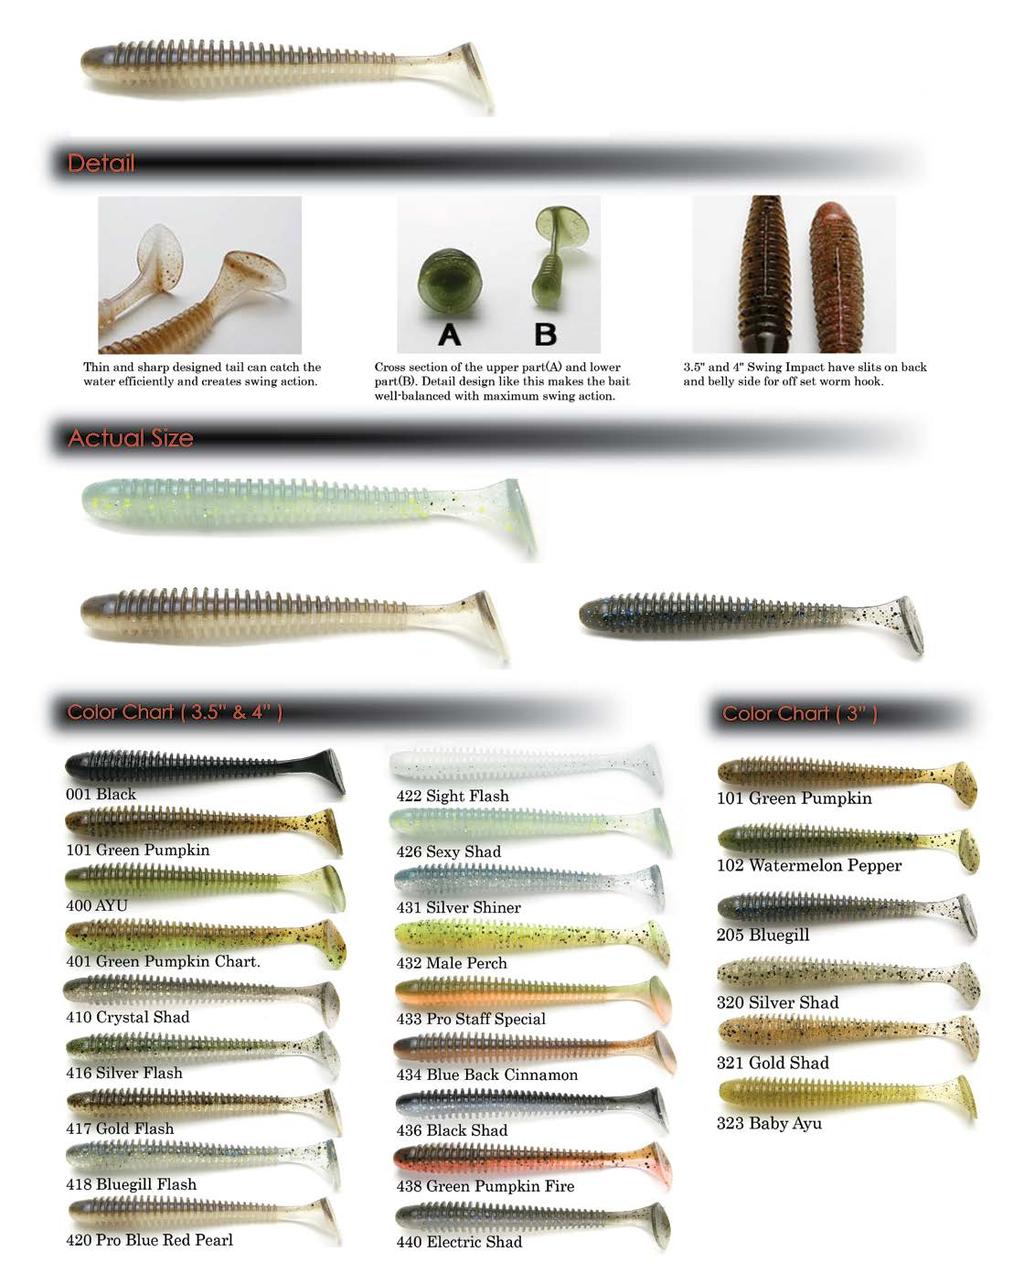 Swing Impact The Swing Impact is a proven tournament winner. These versatile swim baits come in three sizes to match any fishing conditions.